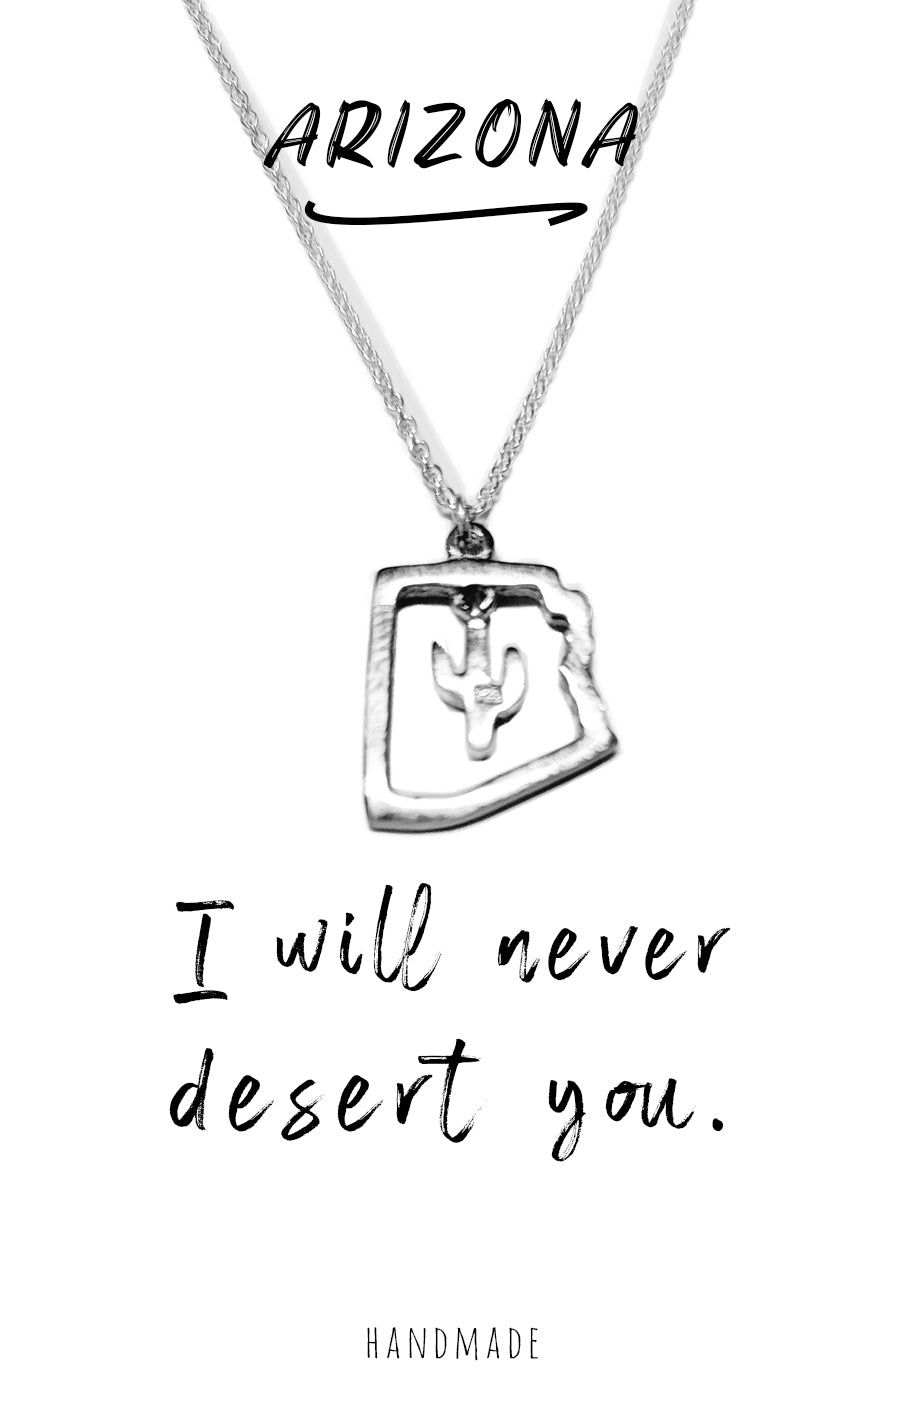 Quinnlyn & Co. Cactus in Arizona State with Swarovzki Crystal Pendant Necklace with Inspirational Quote on Greeting Card